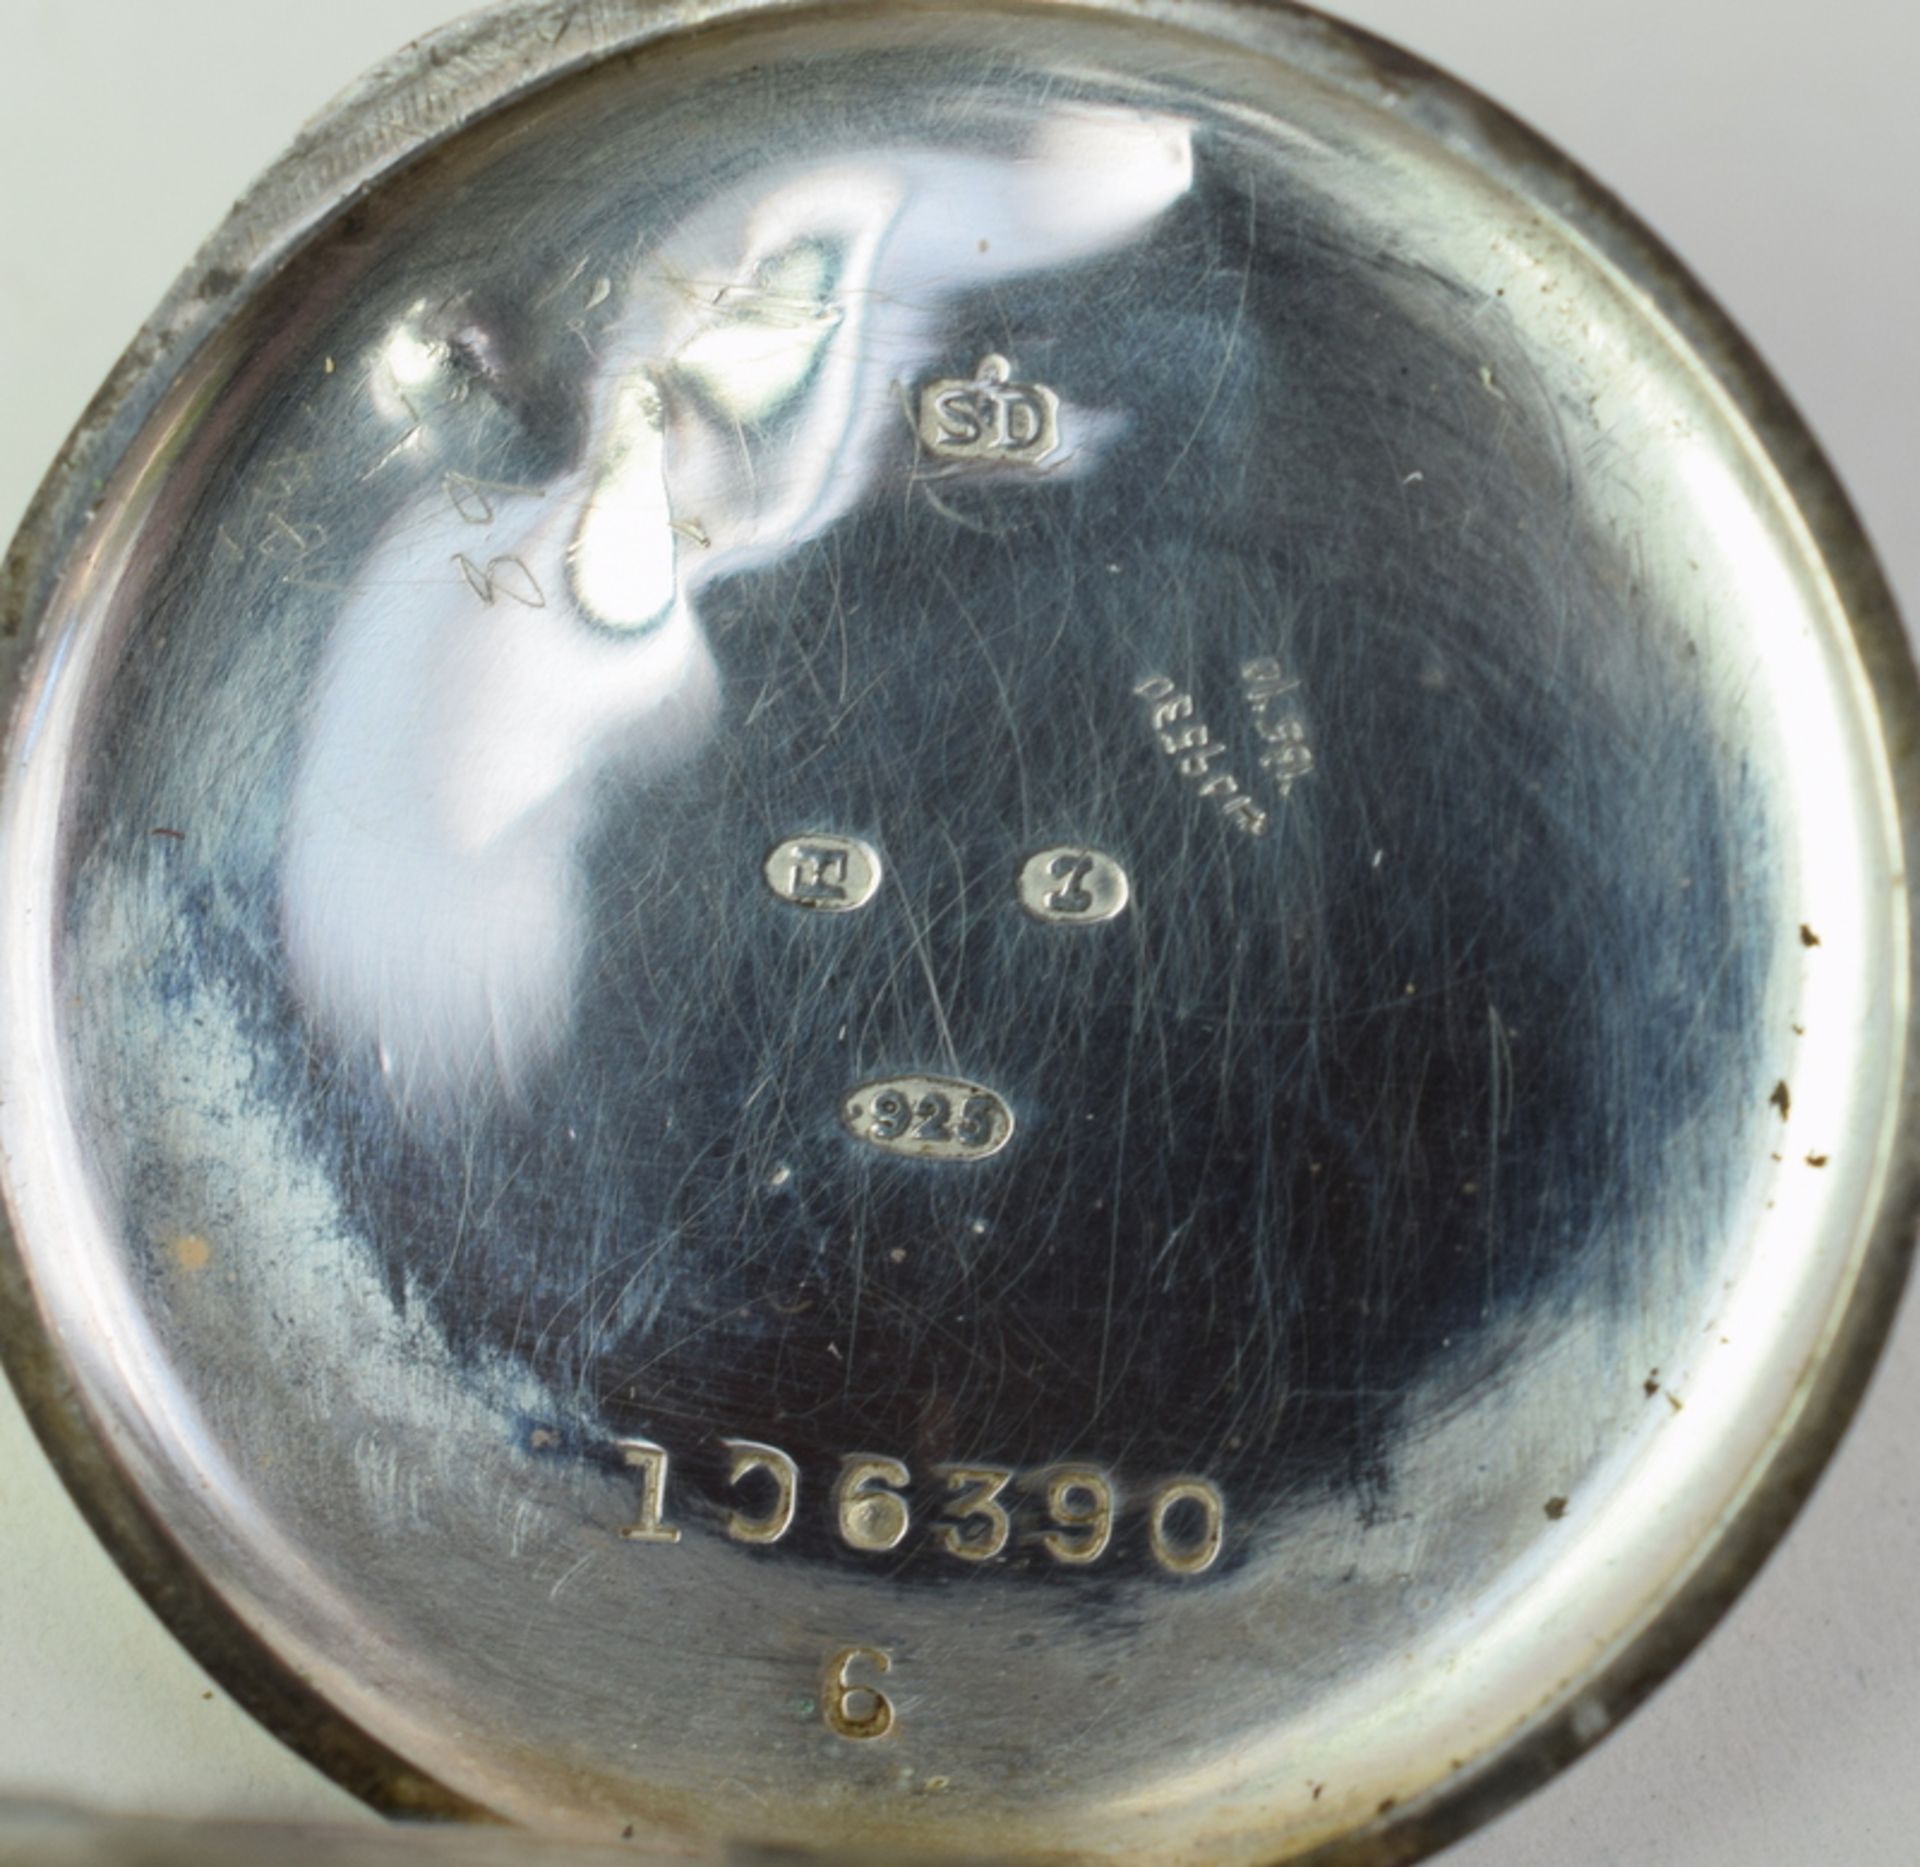 Lady's Silver Trench Watch c1920/30s - Image 5 of 7